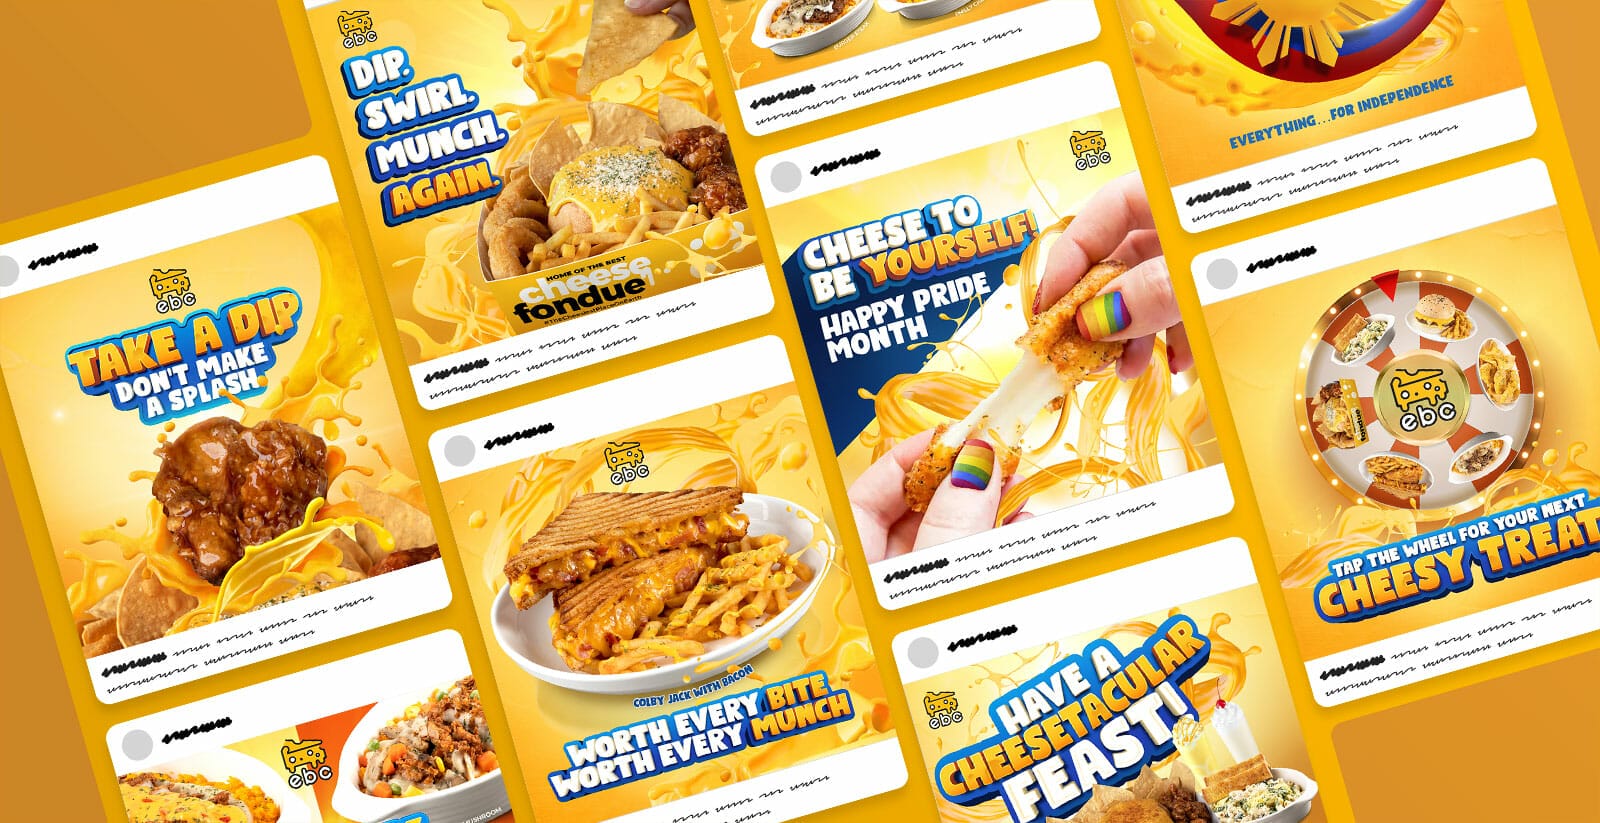 The “Cheesiest Place on Earth” Stretched to Over 8M New Customers and Generated 9 New Franchises in Just 6 Months